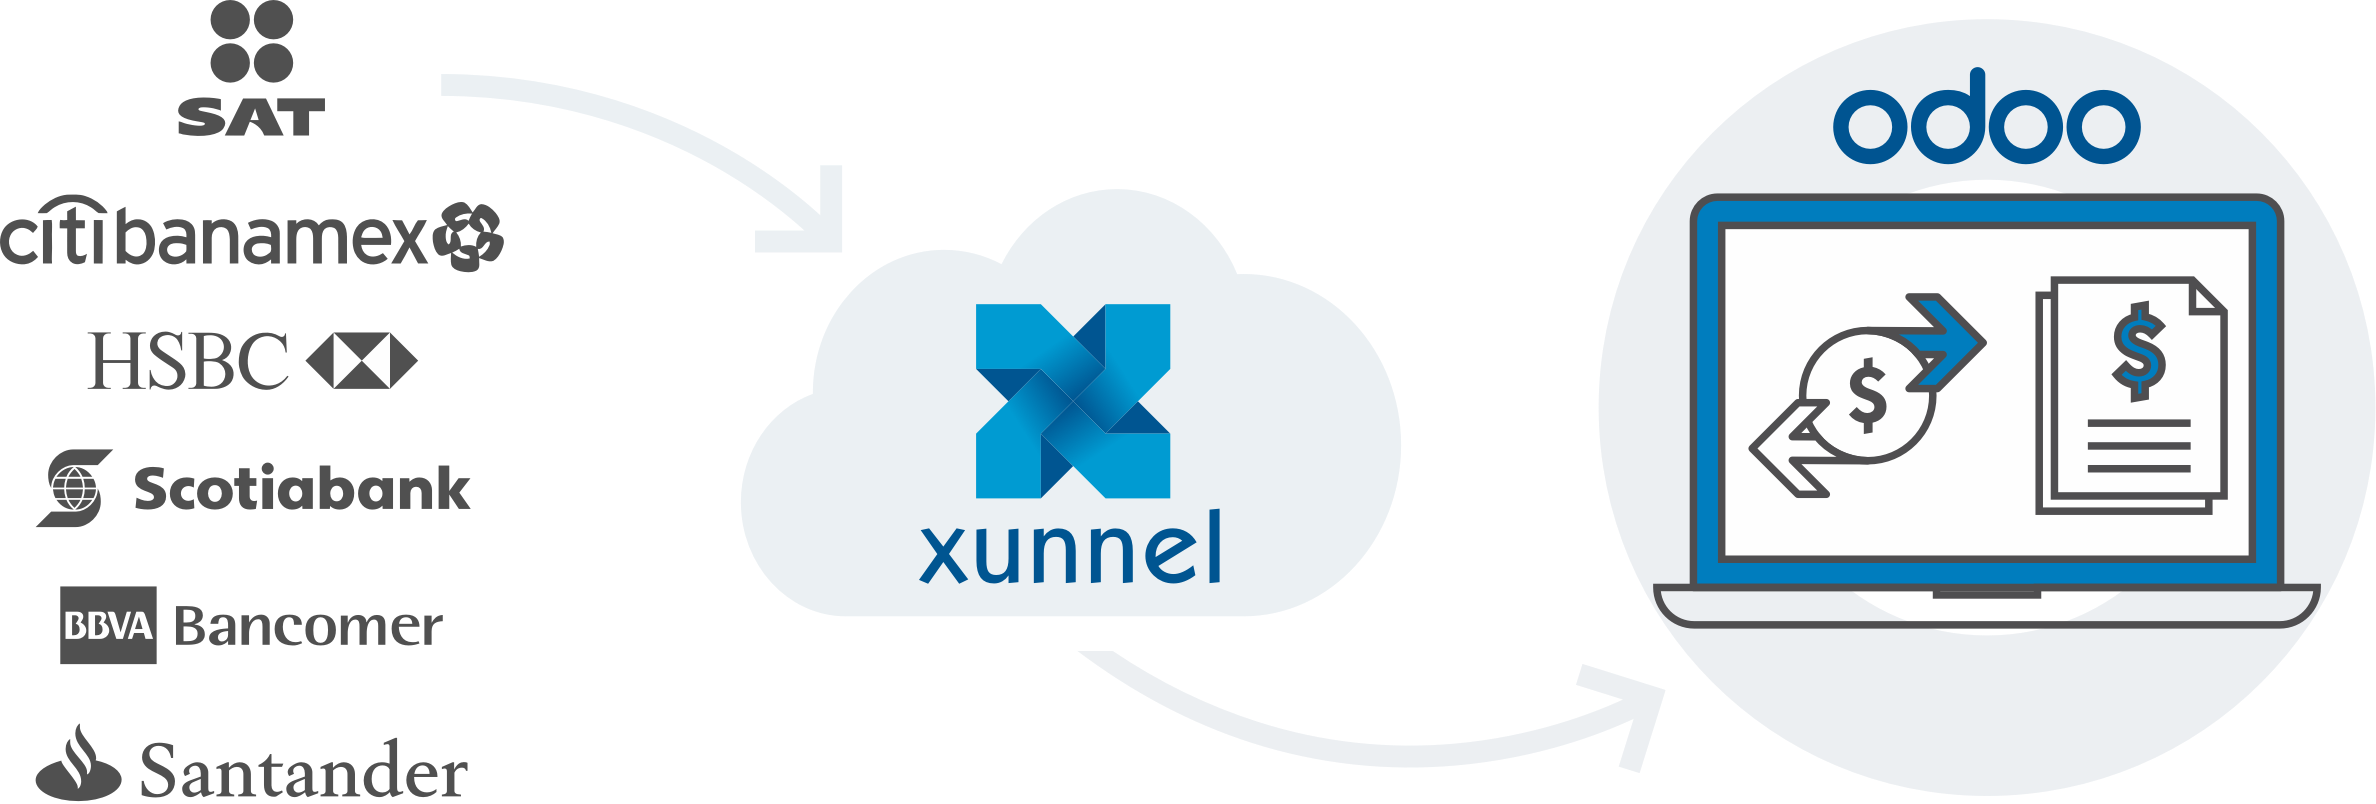 How Xunnel Works